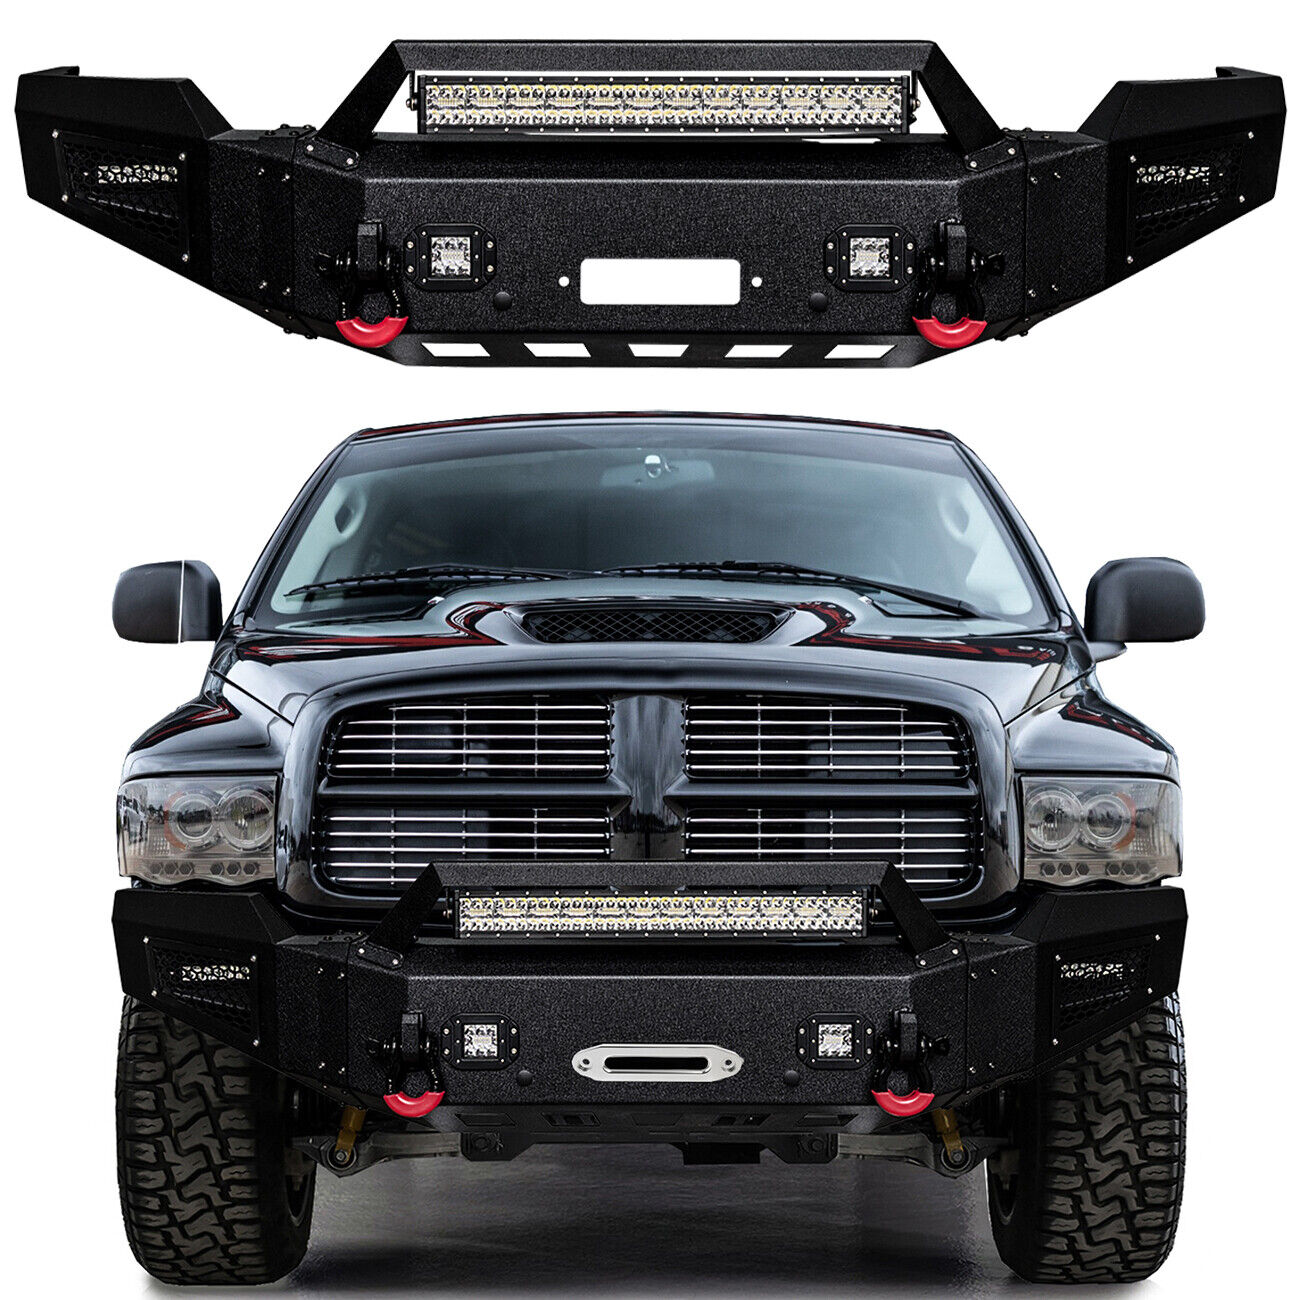 For 2003-2005 Dodge Ram 2500 3500 Front or Rear Bumper with Lightsand D-Rings